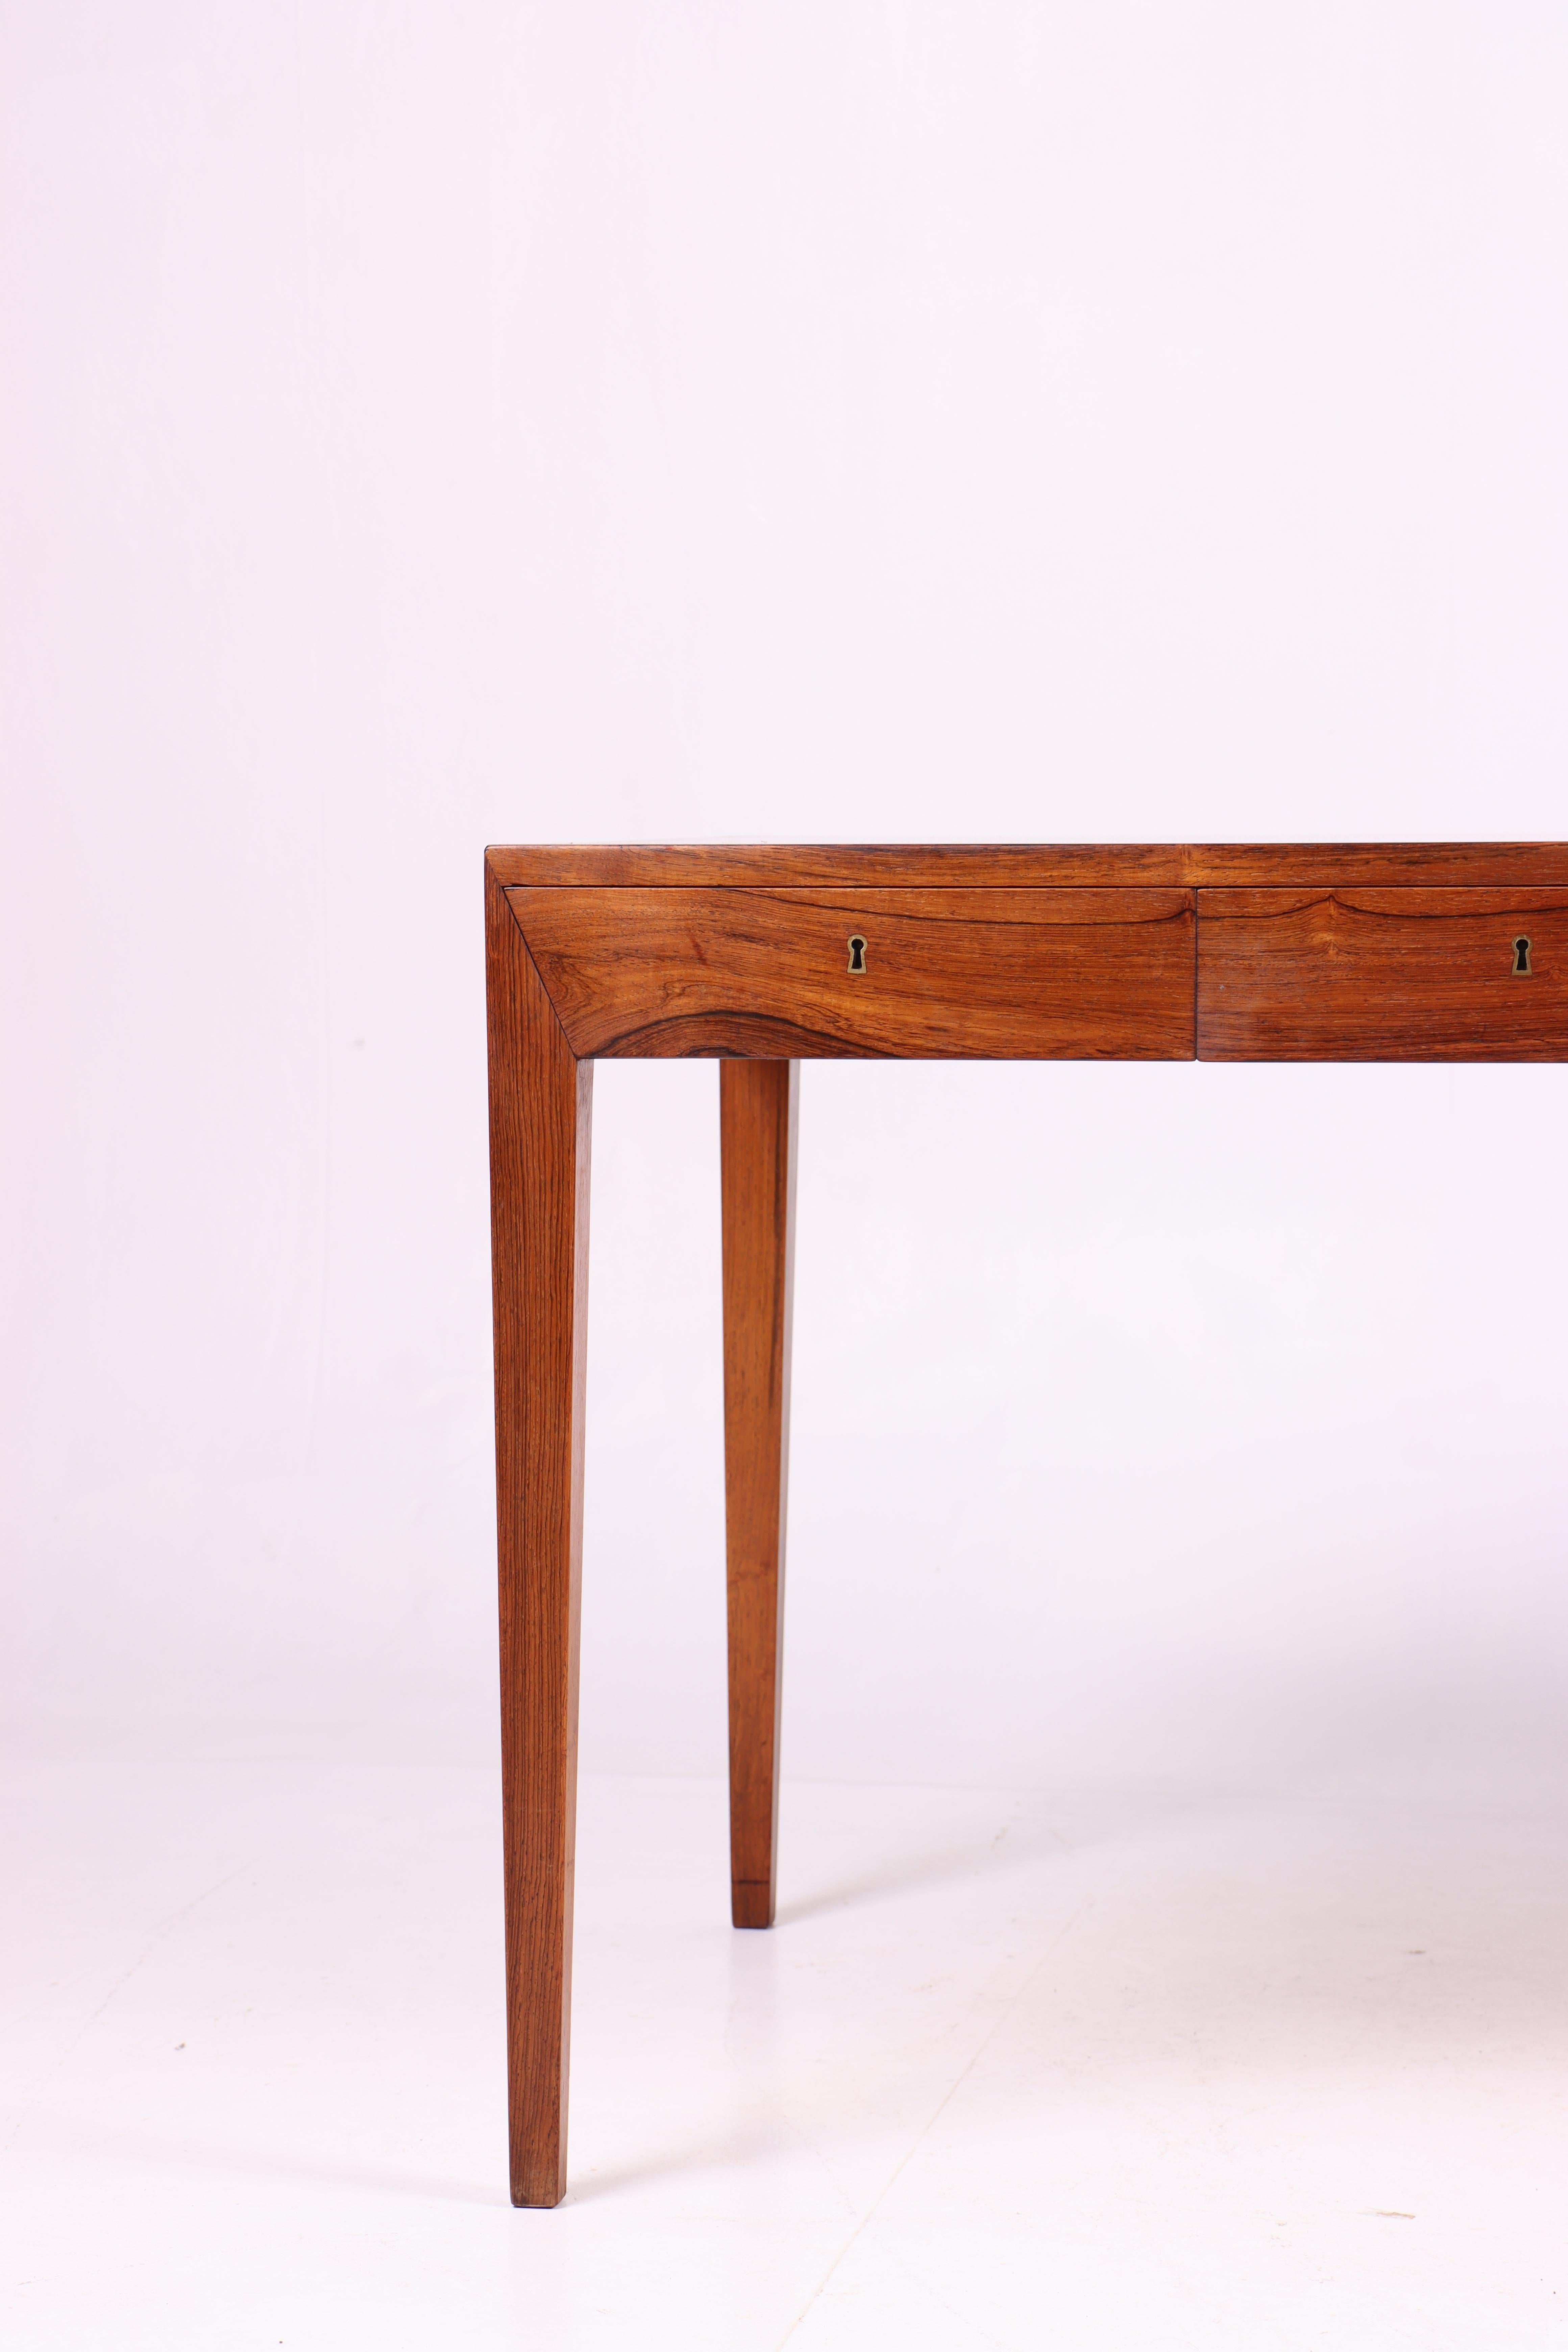 This desk is an iconic example of Danish midcentury design, created by the talented designer Severin Hansen and manufactured by the renowned Haslev Møbelfabrik in the 1950s. The desk is constructed from premium rosewood, characterized by its rich